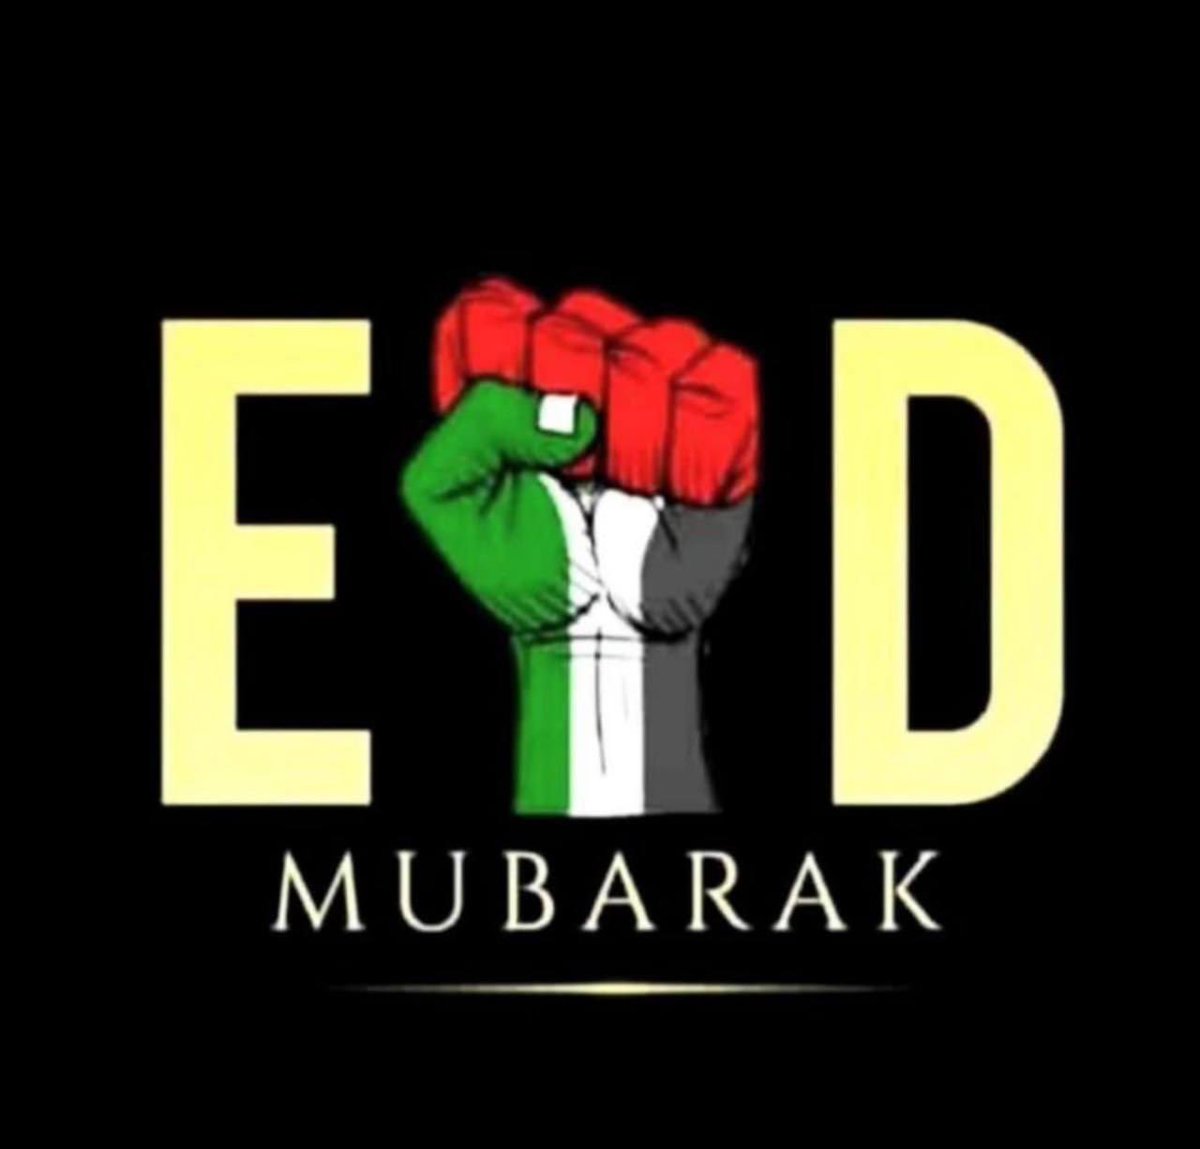 May the endless suffering be stopped, peace become a reality, and collective liberation be possible. Eid Mubarak!